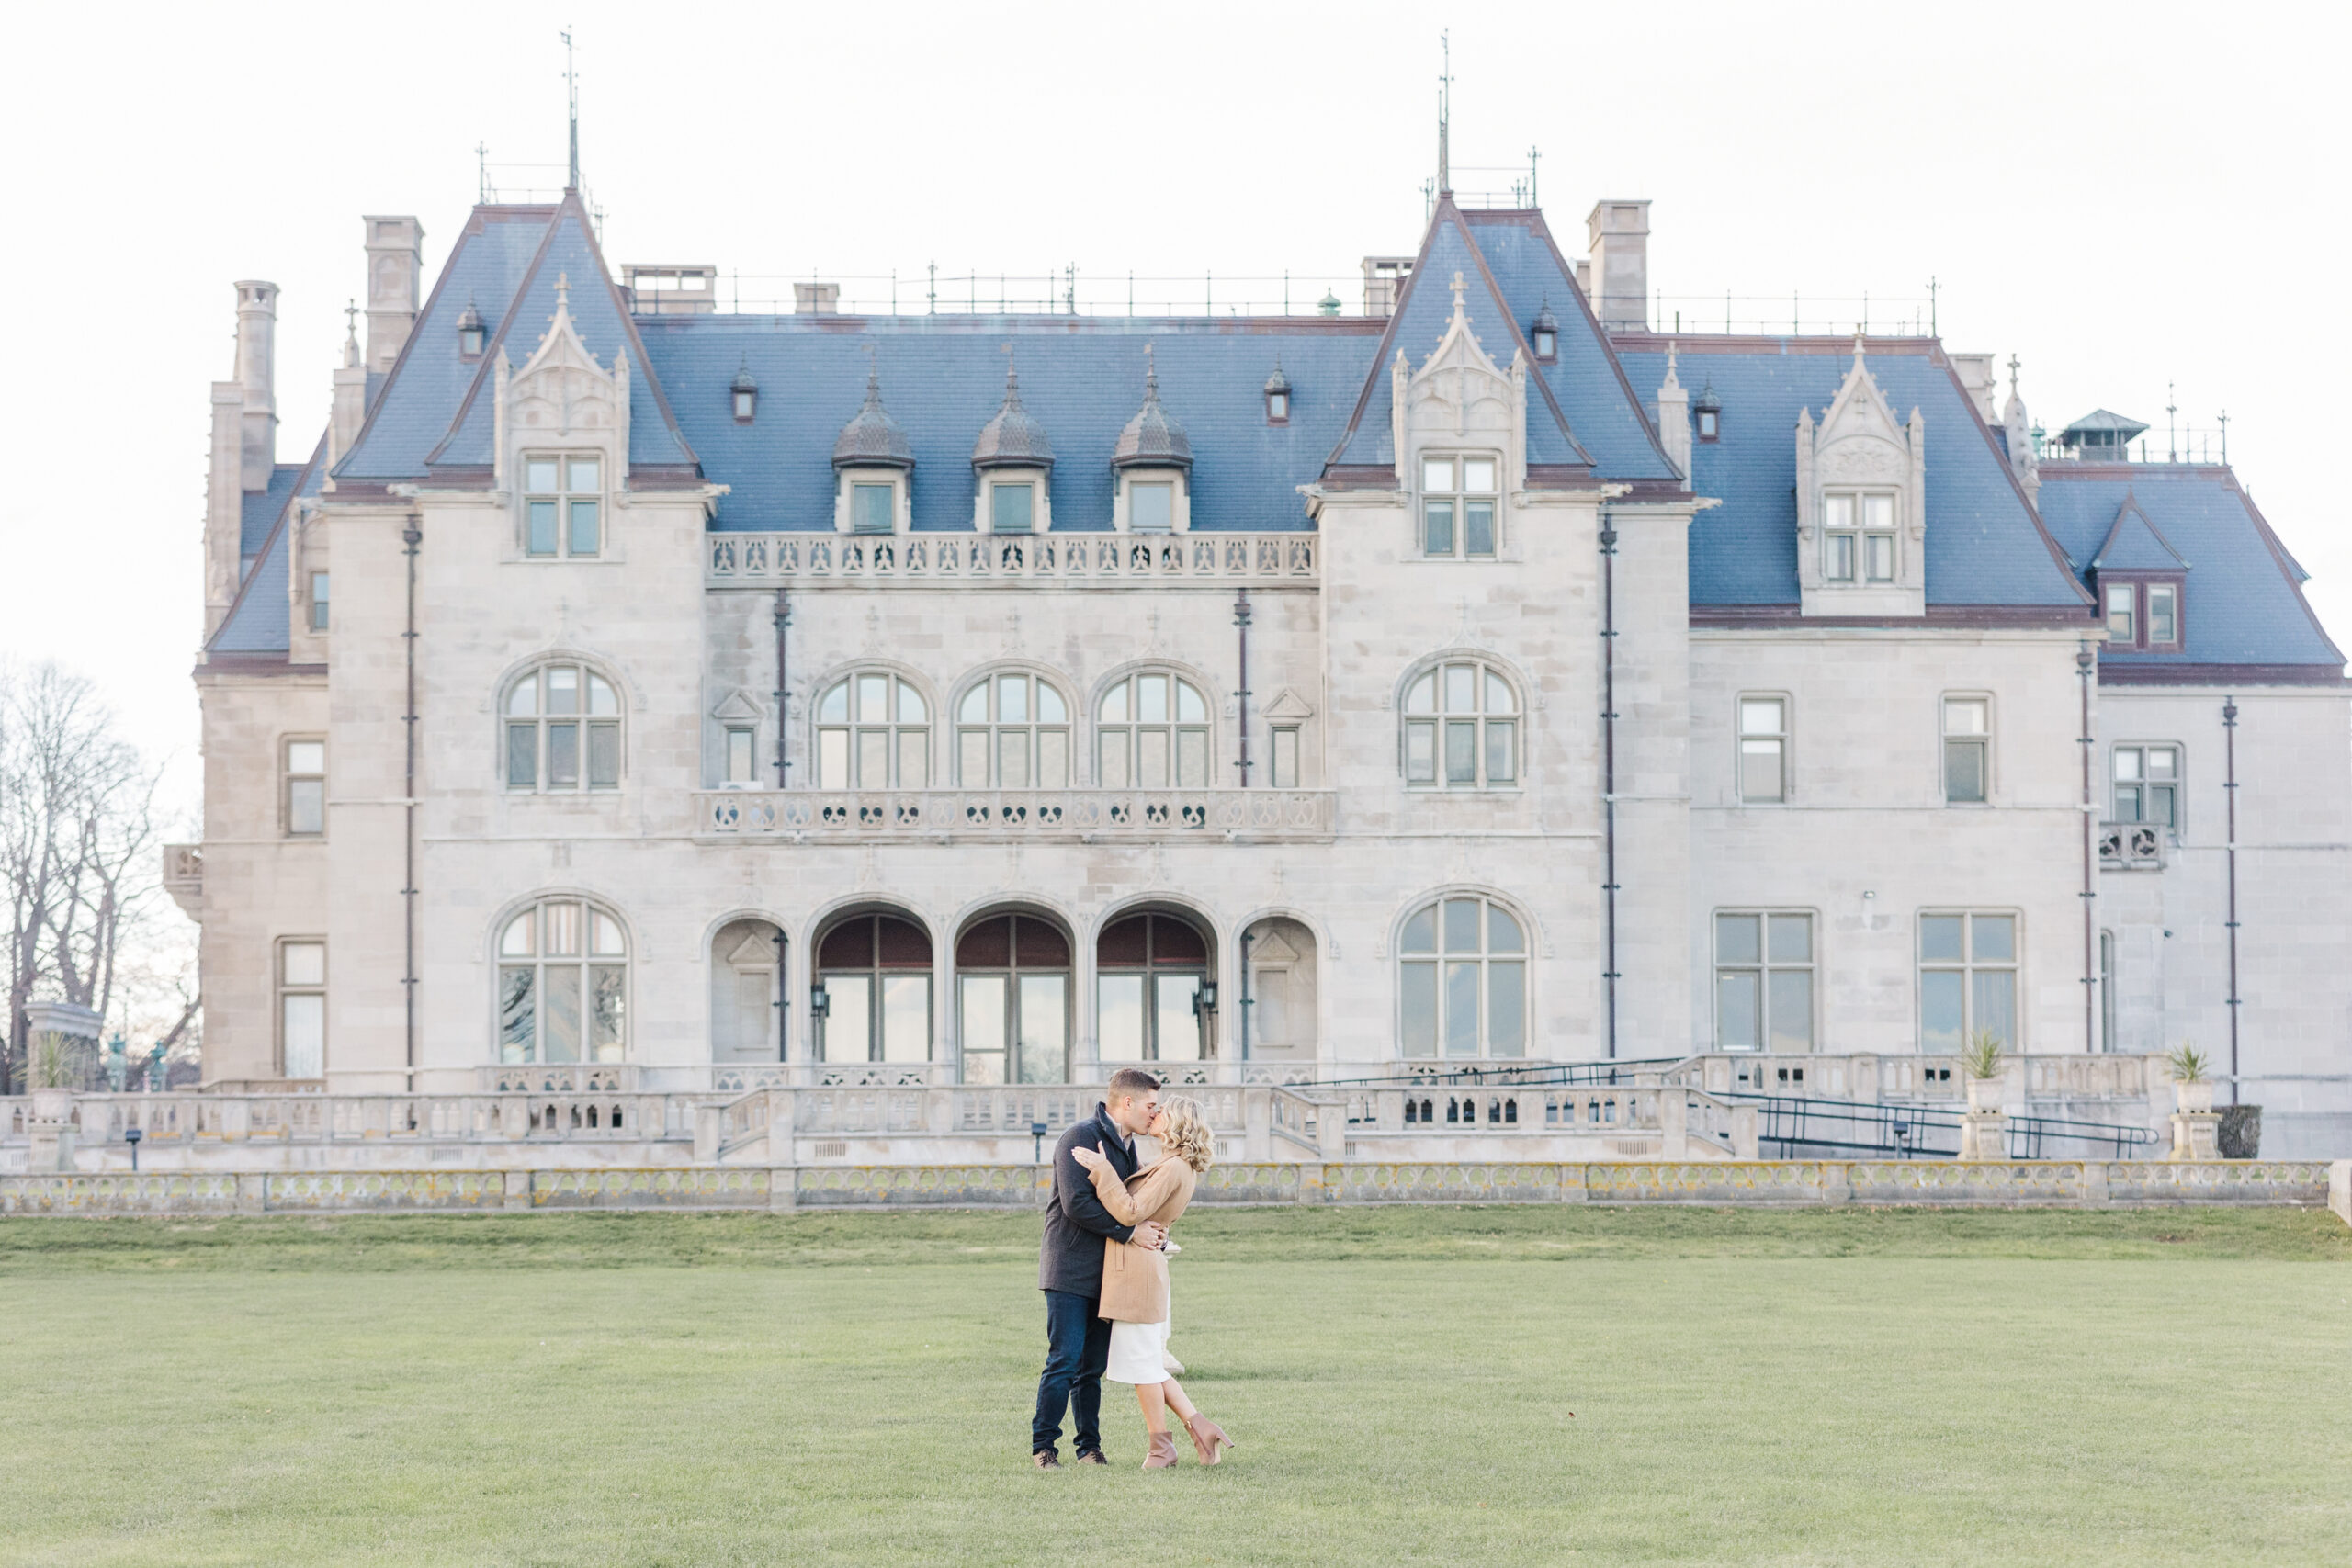 An engaged couple embrace on the back lawn of Ochre Court in Newport Rhode Island.